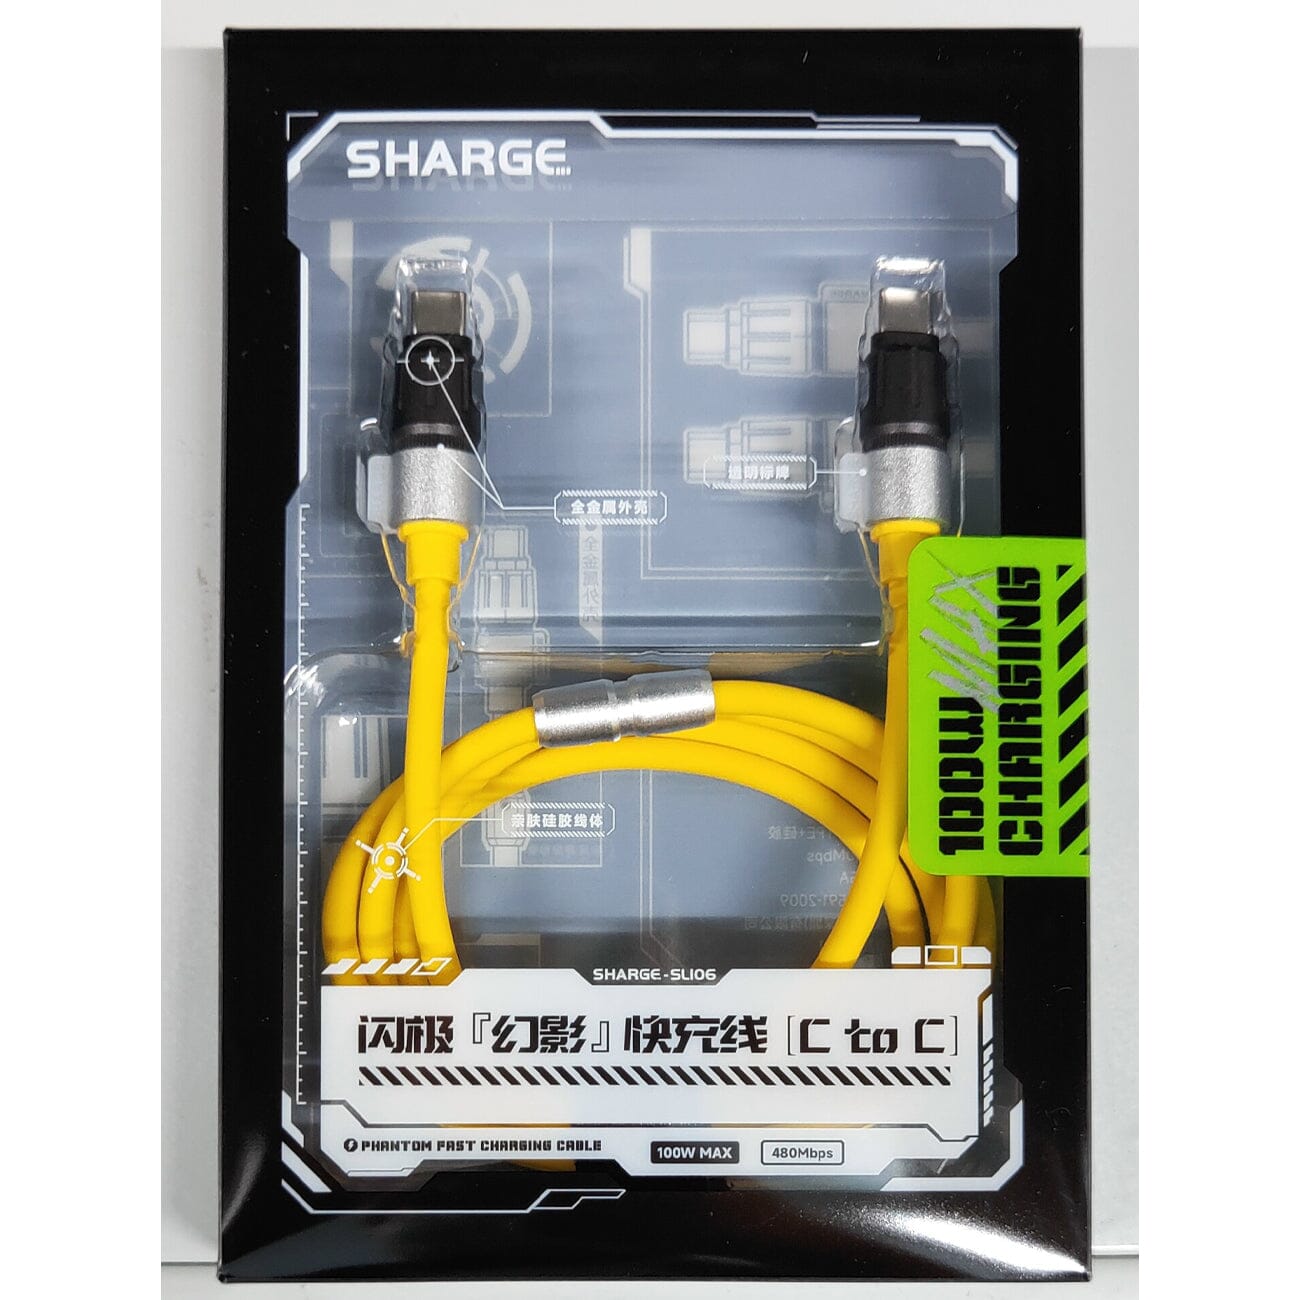 Shargeek SL106 100W USB-C to USB-C High Speed Phantom Cable 1.2m E-Marker Chip with LED Light SHARGEEK 